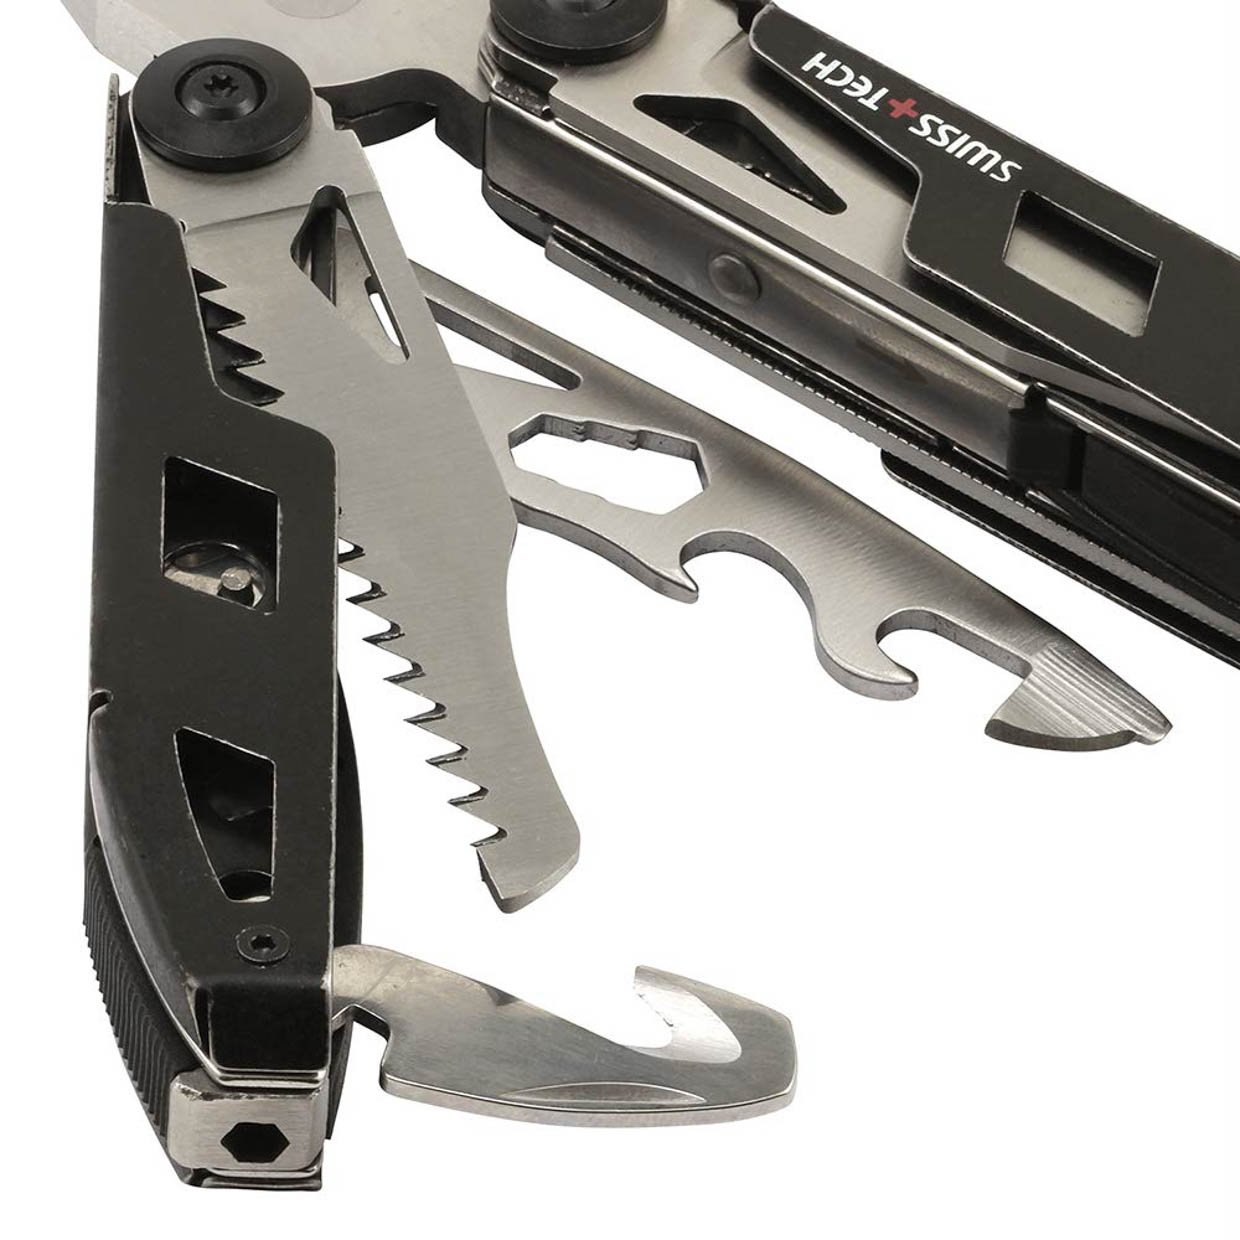 Swiss+Tech Multi-Pliers Put 23 Tools in Your Pocket